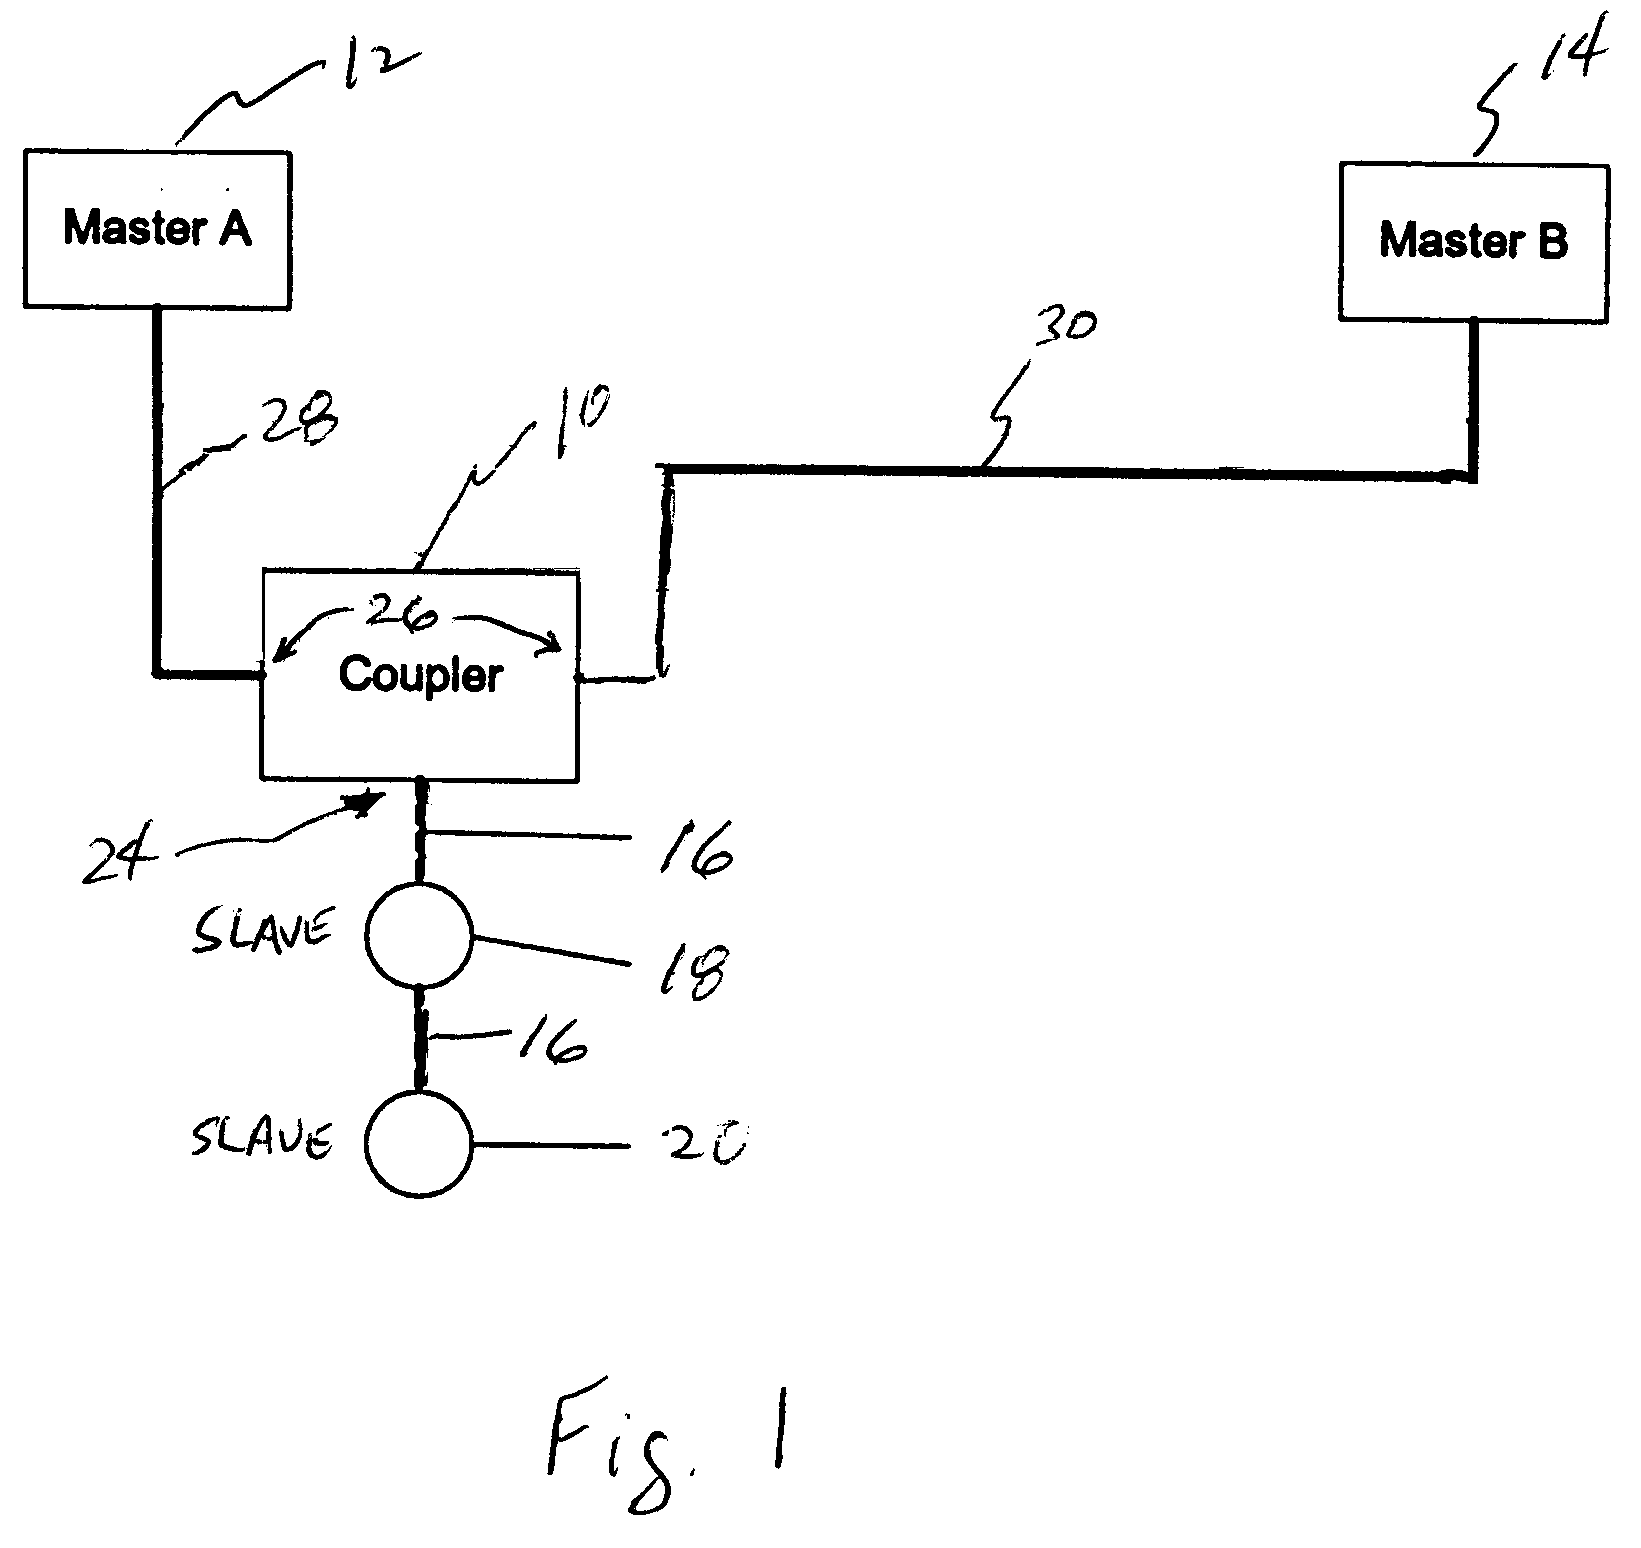 Redundancy coupler for industrial communications networks